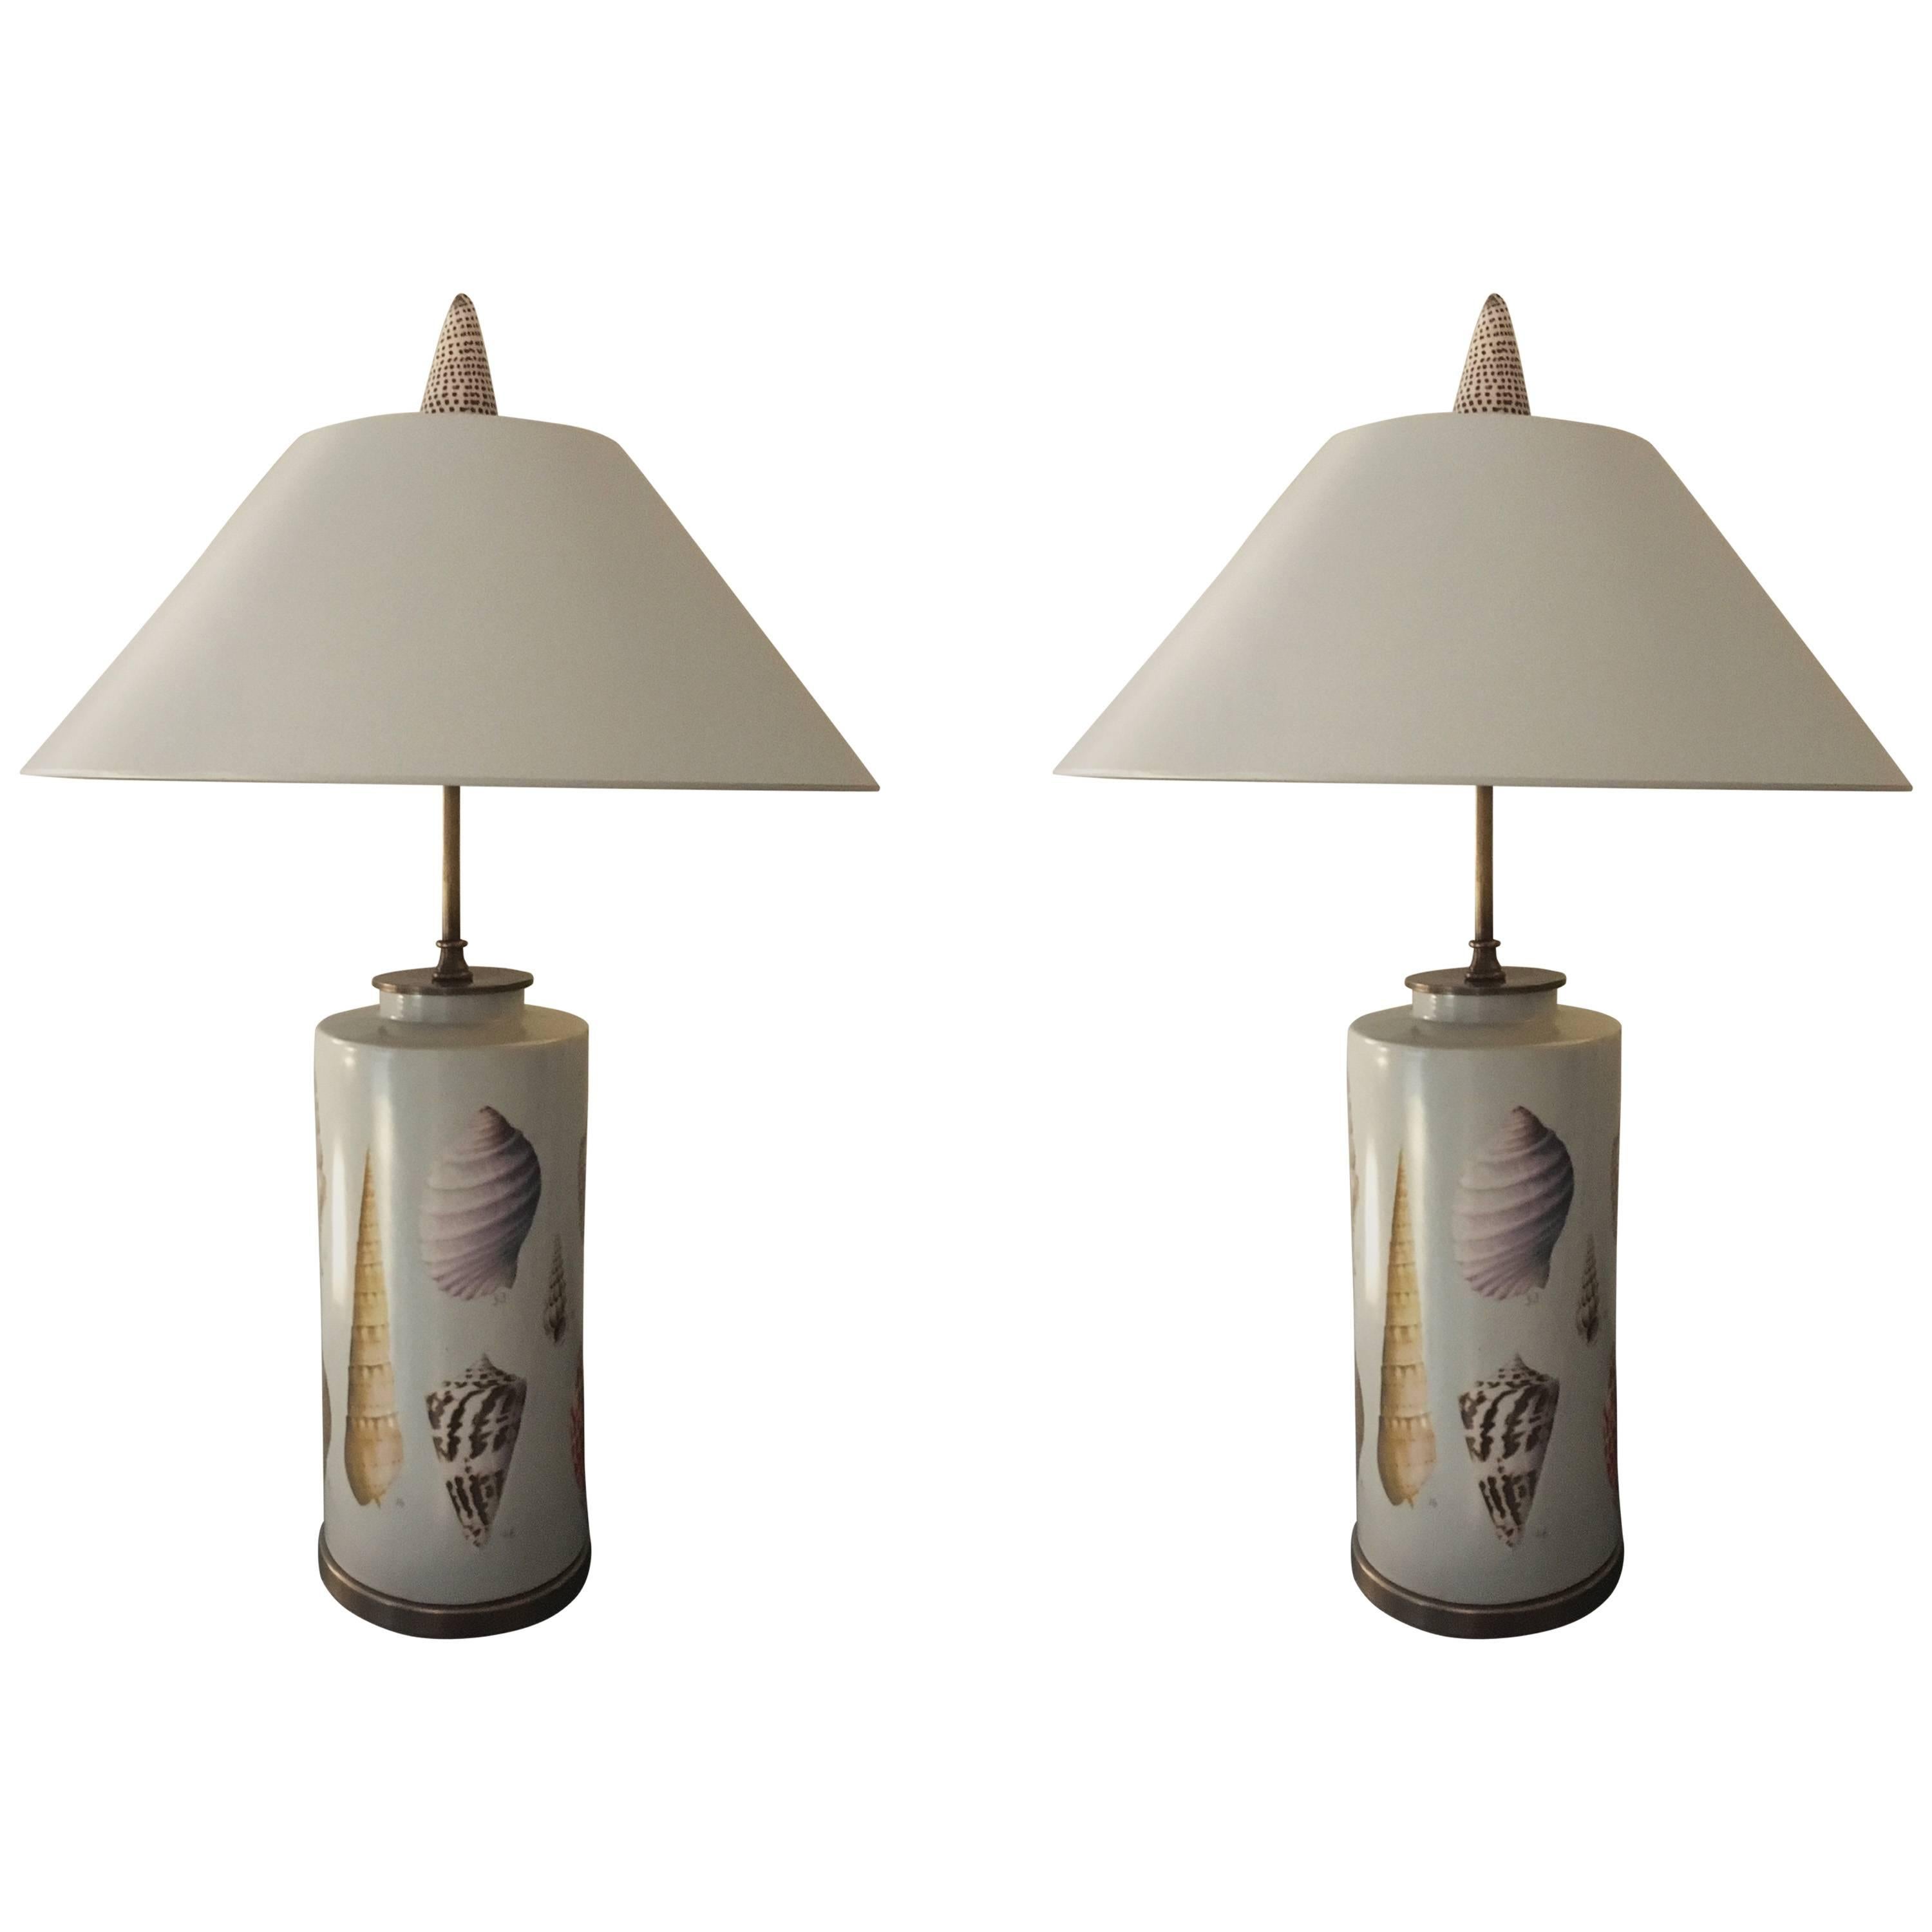 Pair of Shell Design Porcelain Vases Mounted as Table Lamps